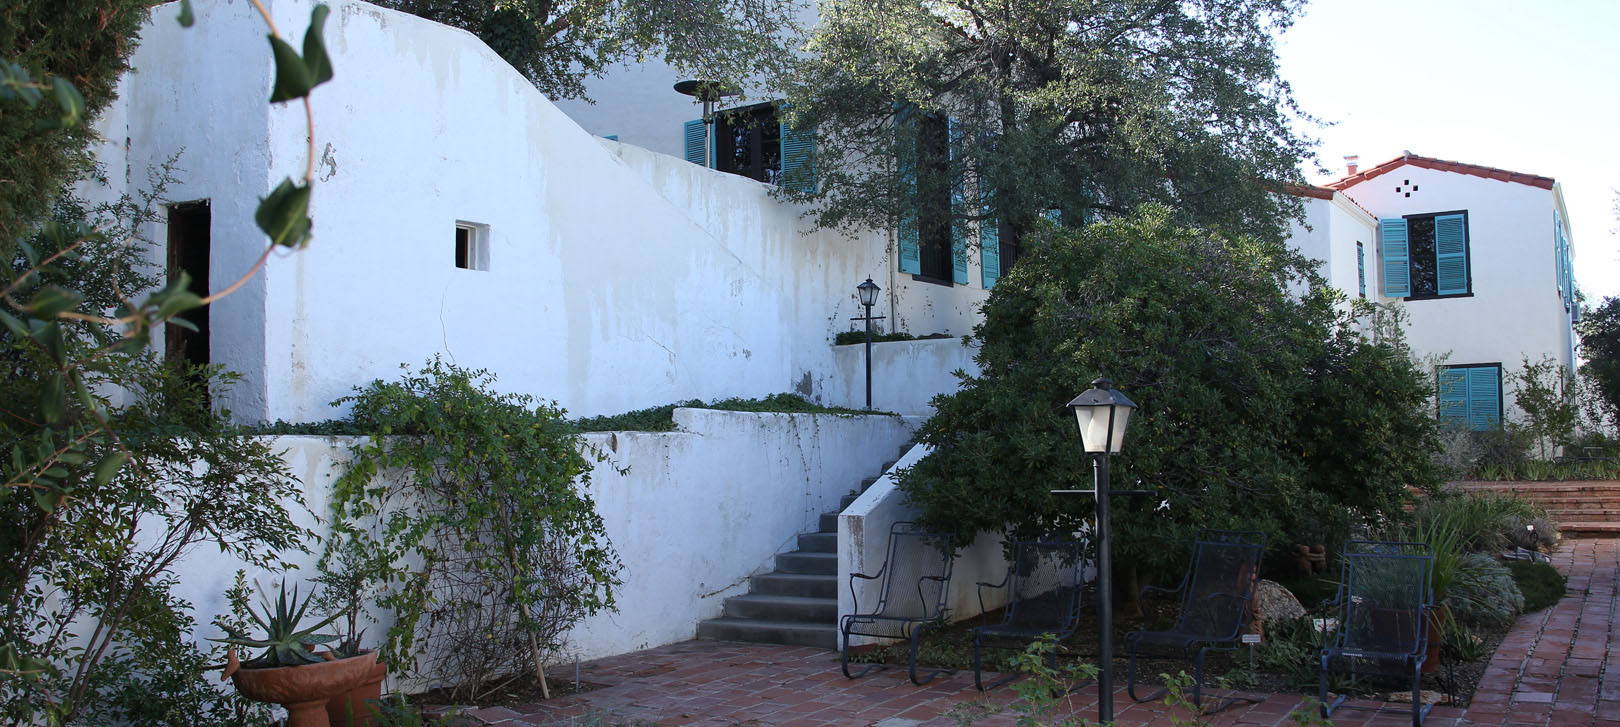 A view of the Kannally Ranch House, with plants nearby